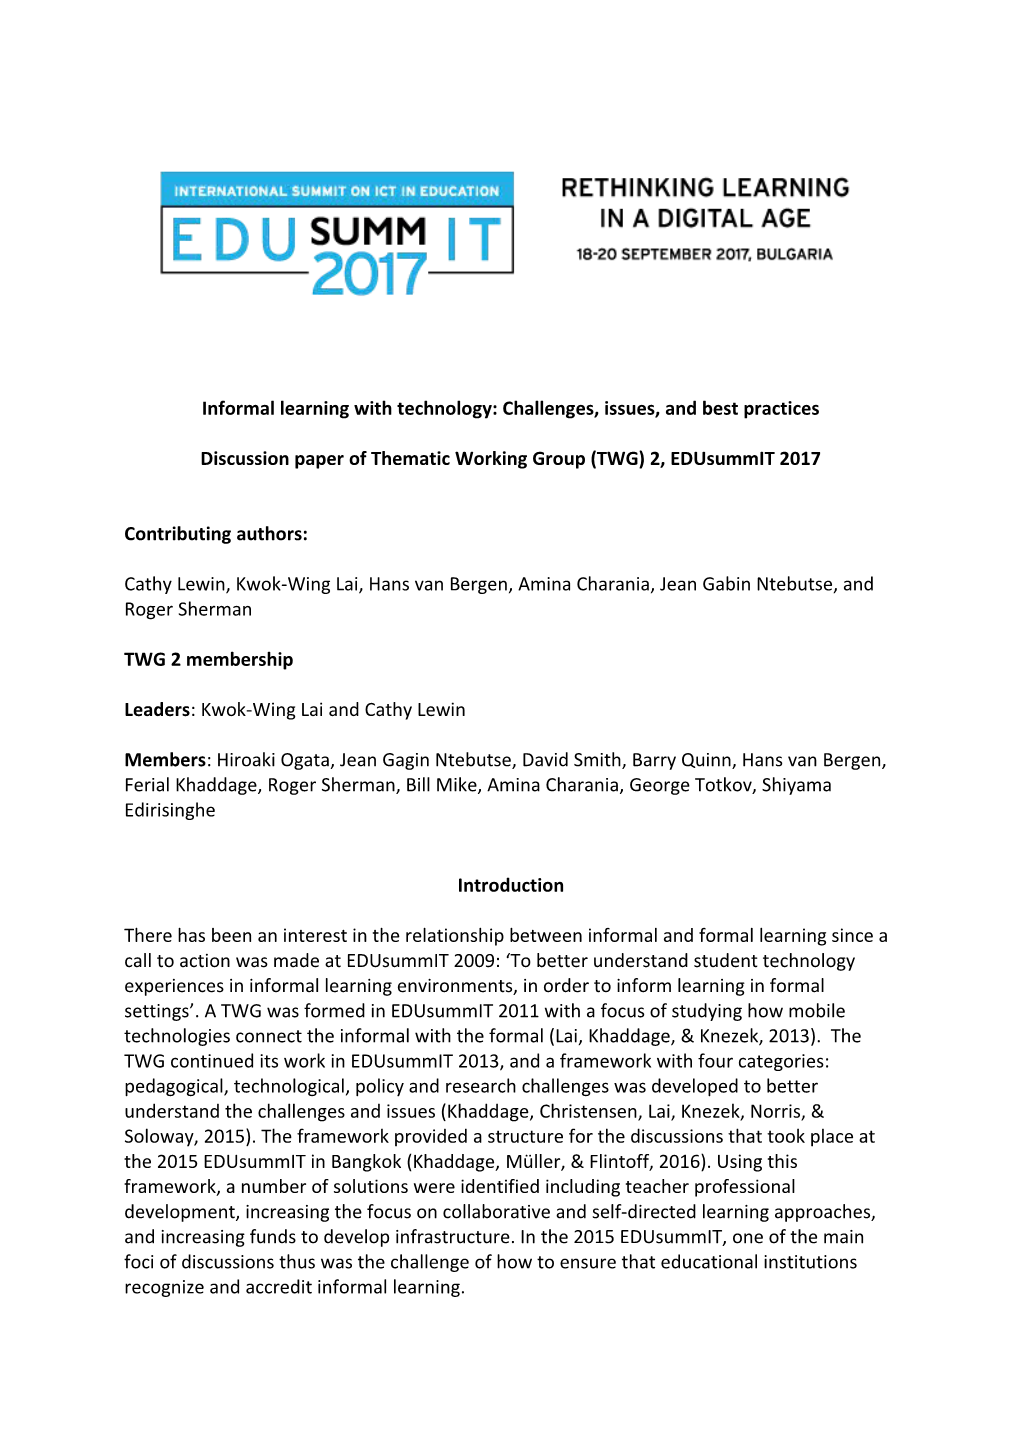 Informal Learning with Technology: Challenges, Issues, and Best Practices